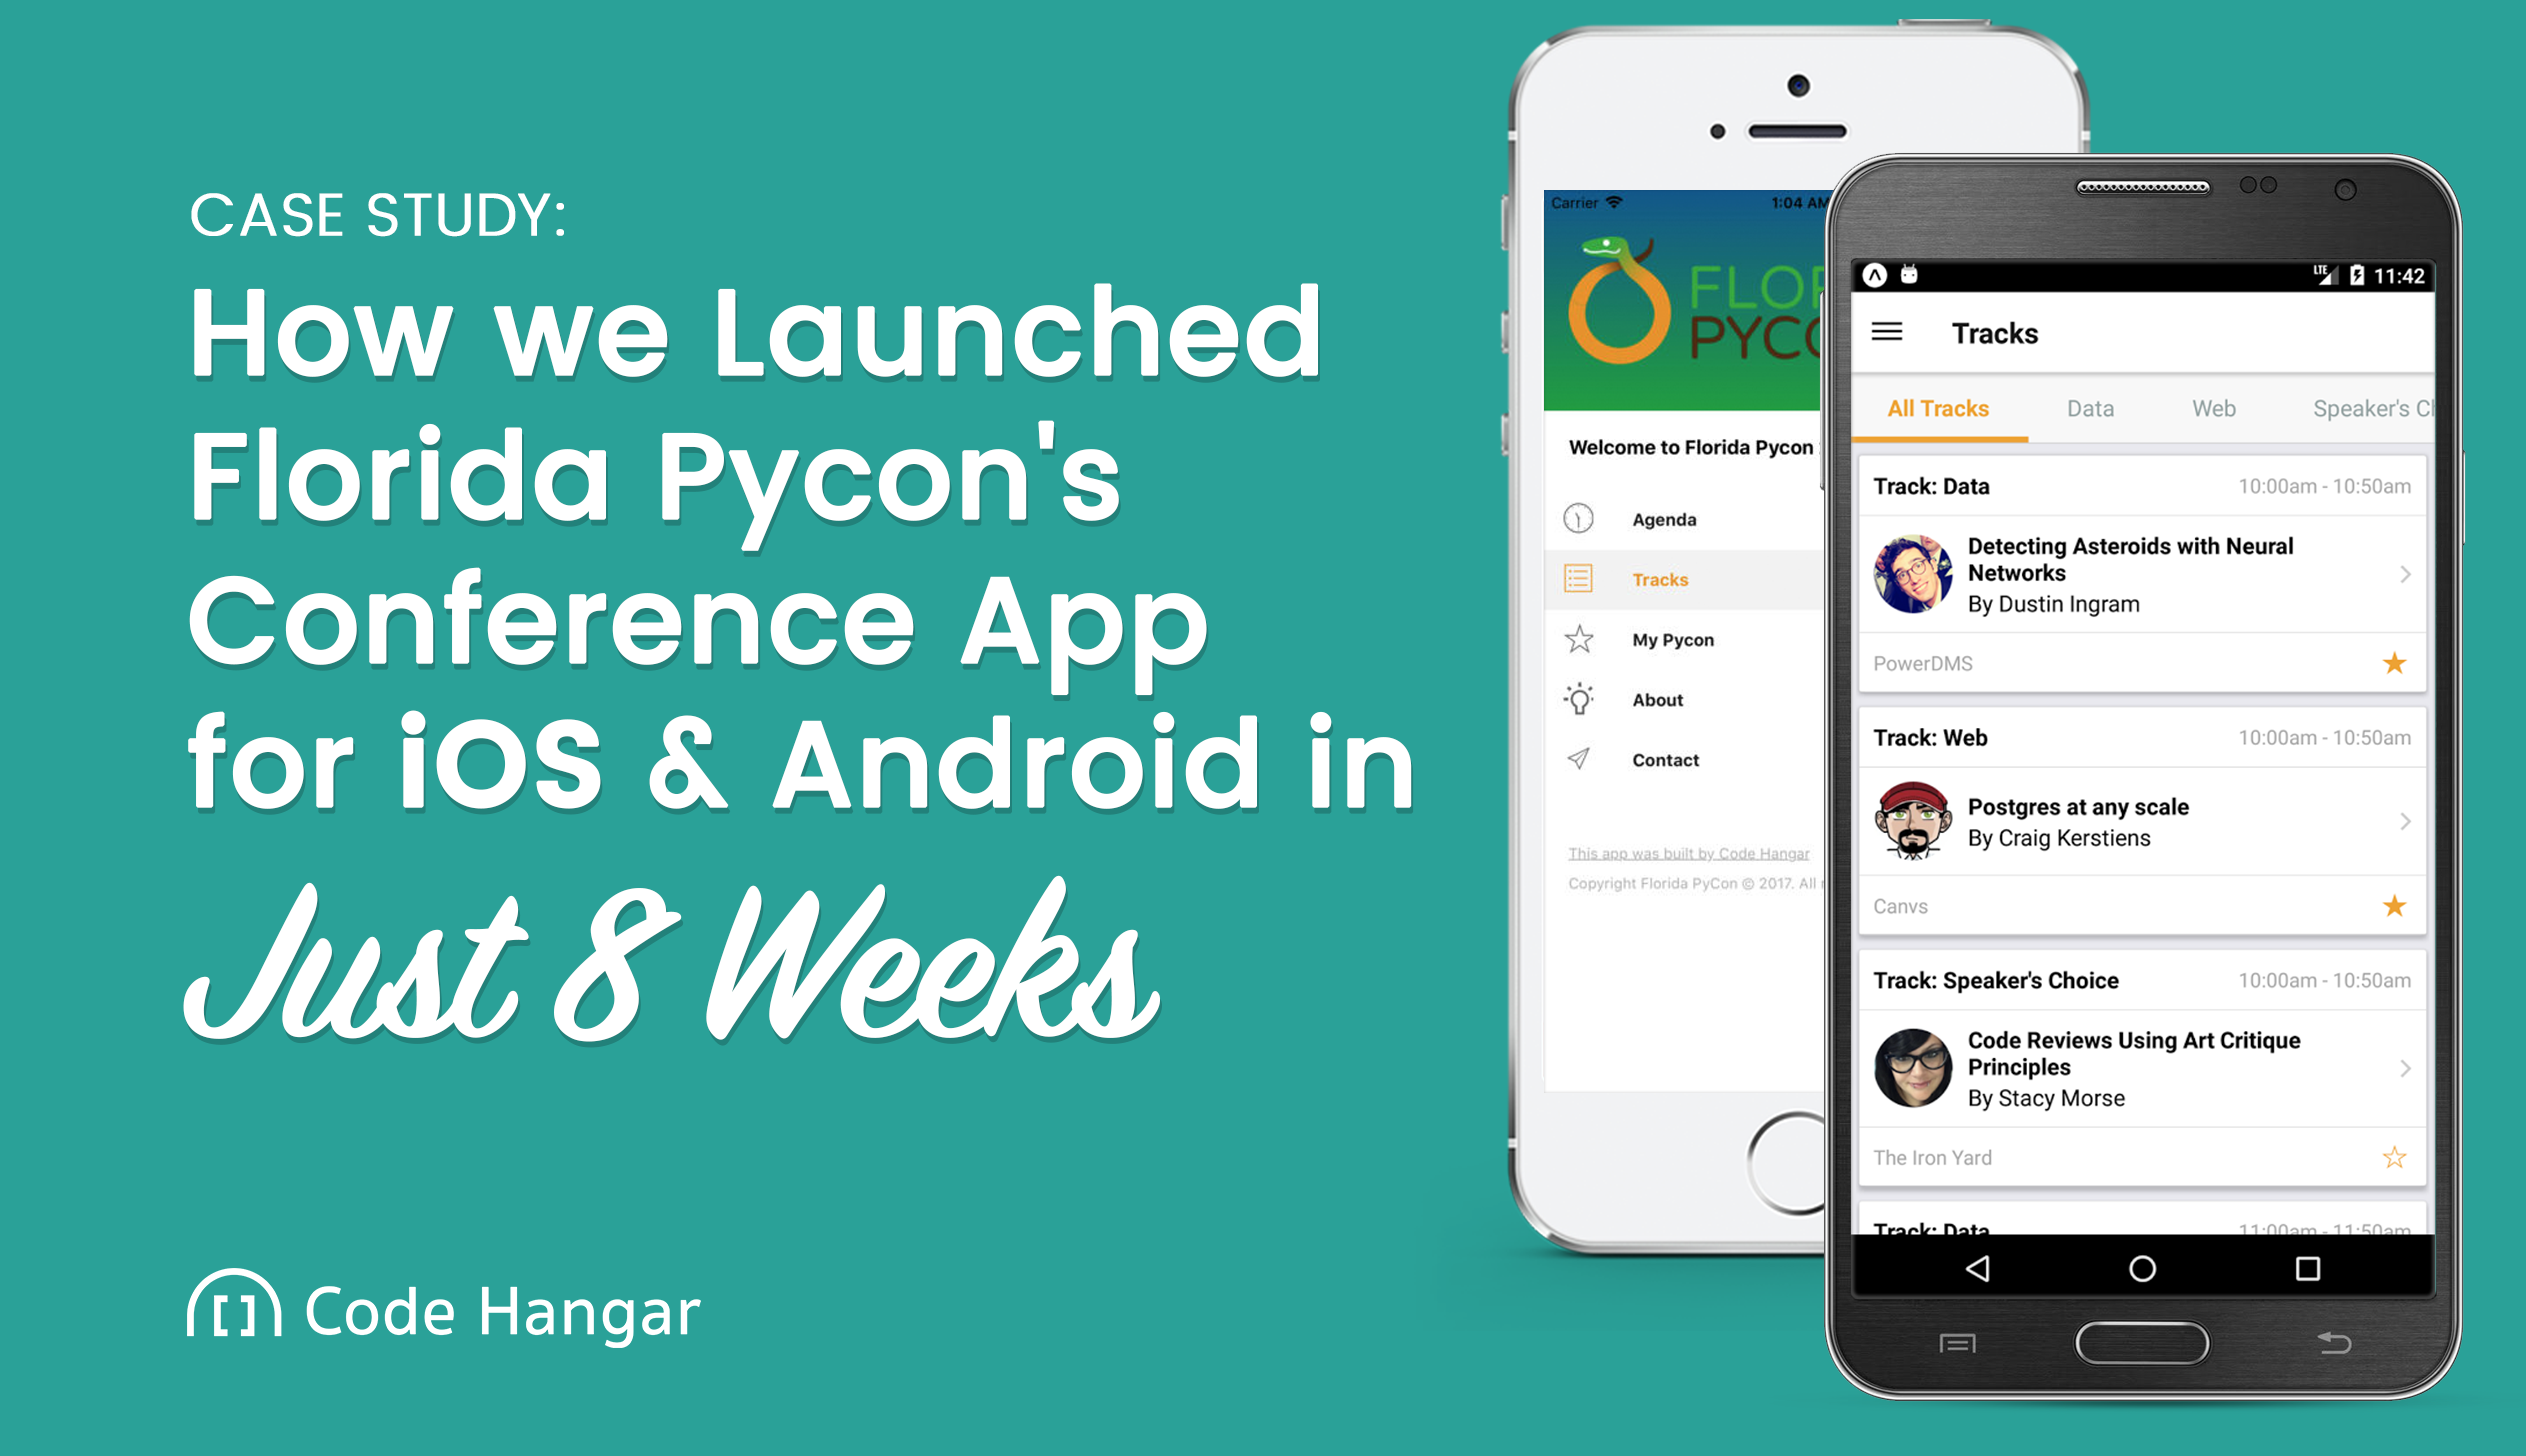 How we Launched Florida Pycon's Conference App for iOS and Android in Just 8 Weeks